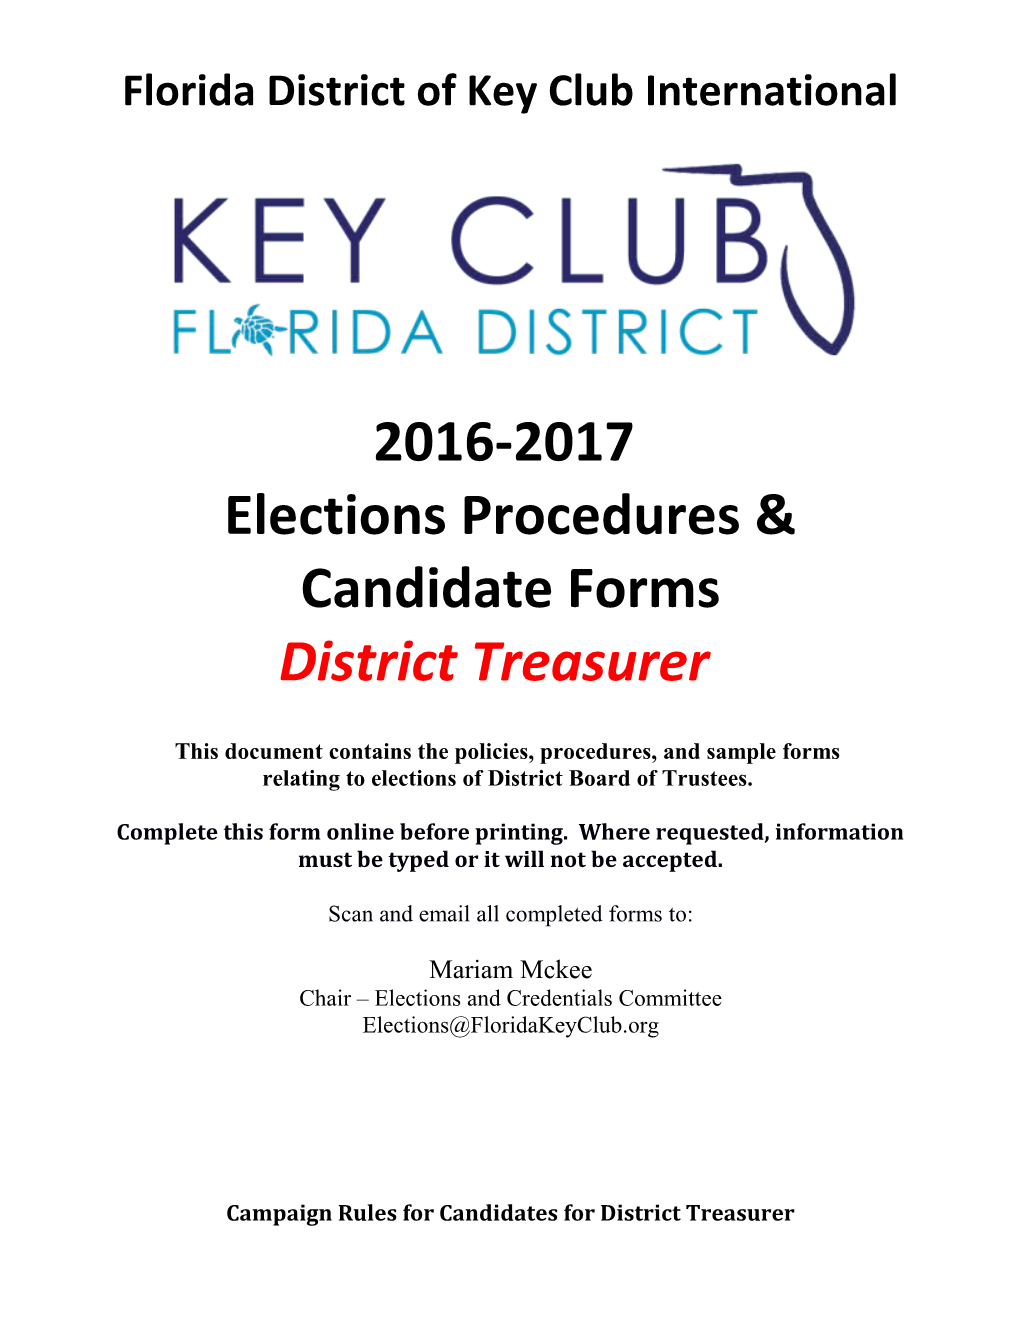 Elections Procedures & Candidate Forms